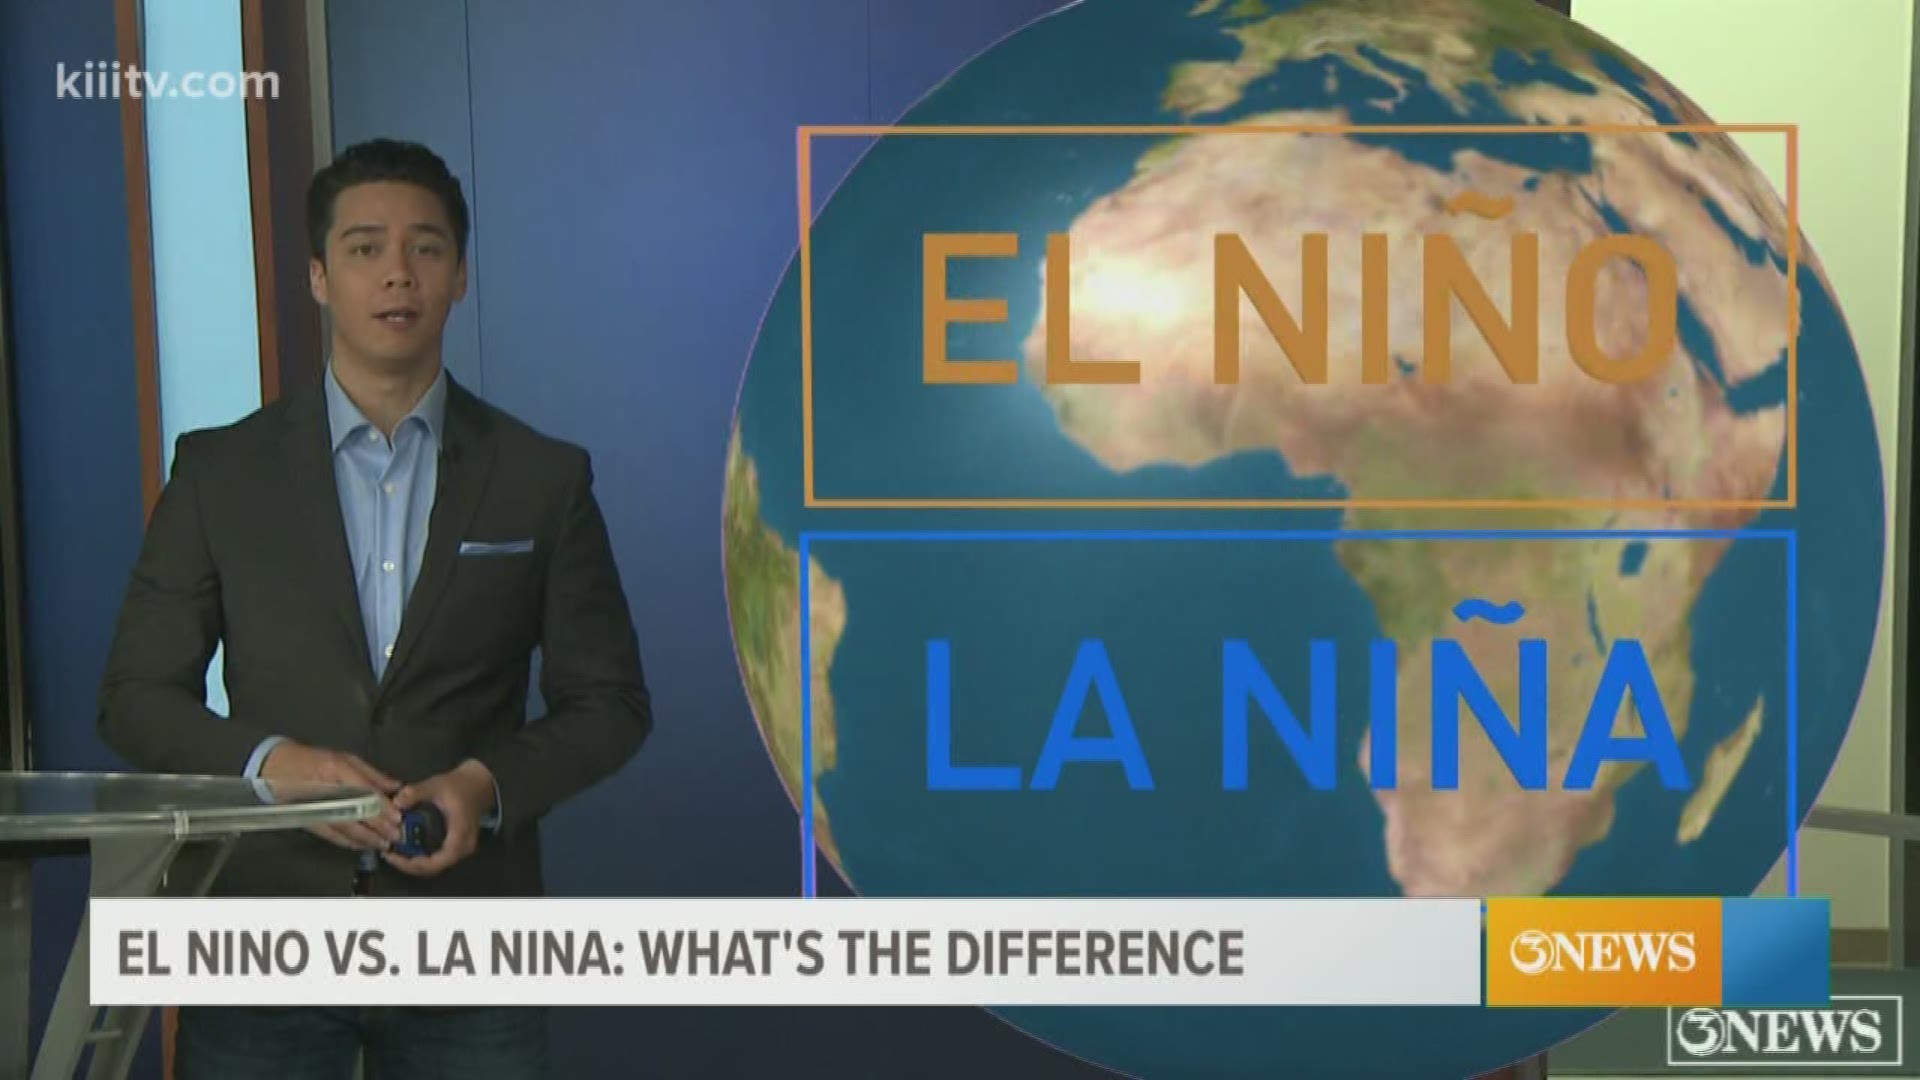 El Nino has a tremendous influence on climate but did you know it impacts our hurricane season? Meteorologist Ryan Shoptaugh expands on El Nino vs La Nina.